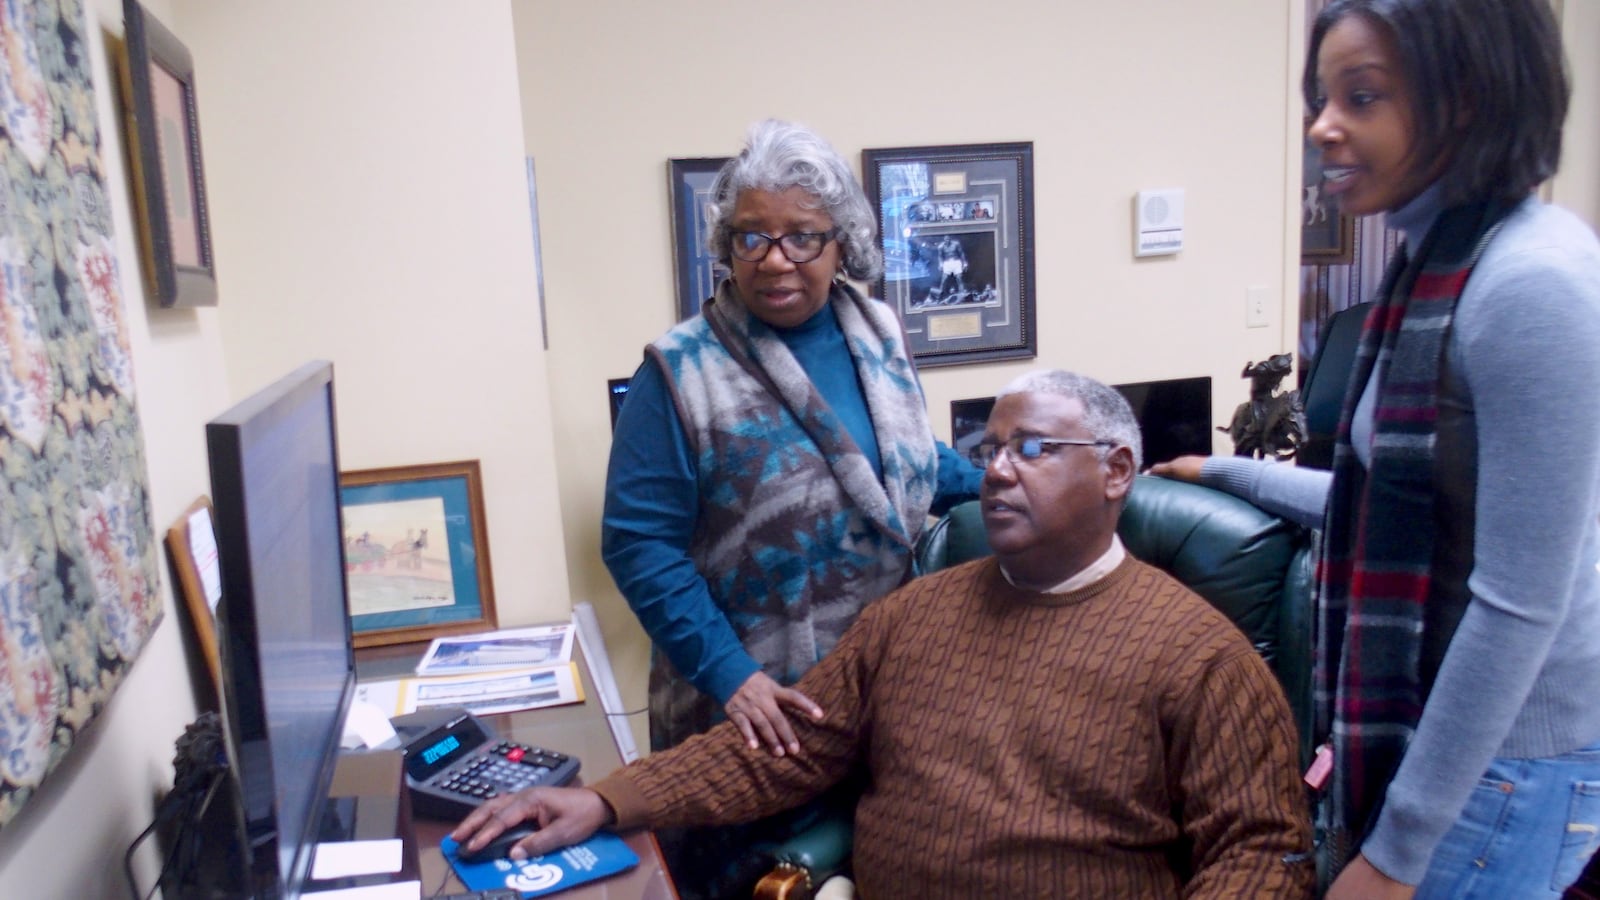 Winston Gipson confers with his wife and daughter, who help run Gipson Mechanical Contractors, a family-owned business in Memphis for 35 years.